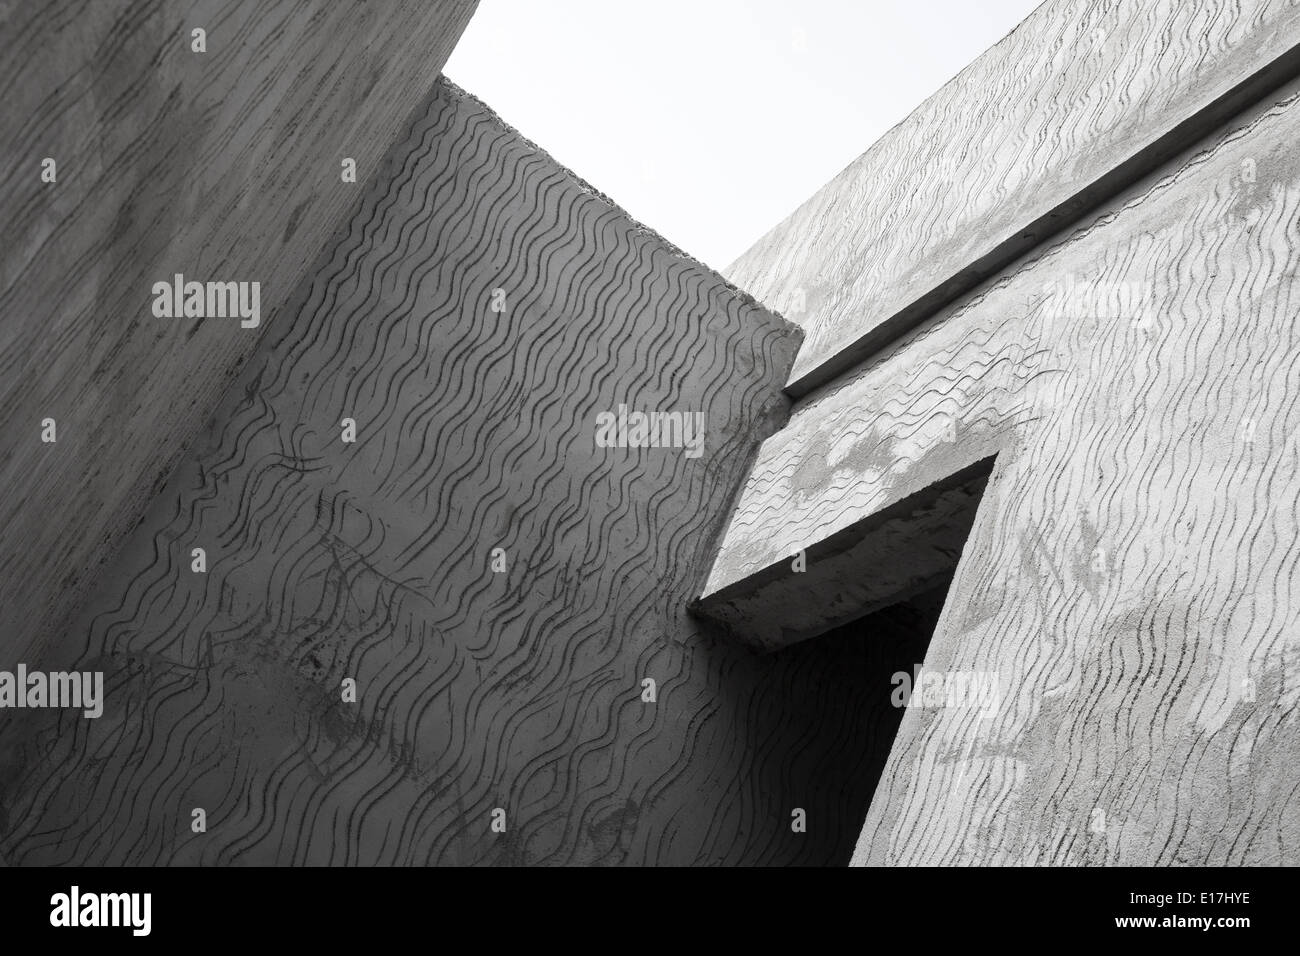 Abstract modern gray concrete architecture photo fragment Stock Photo